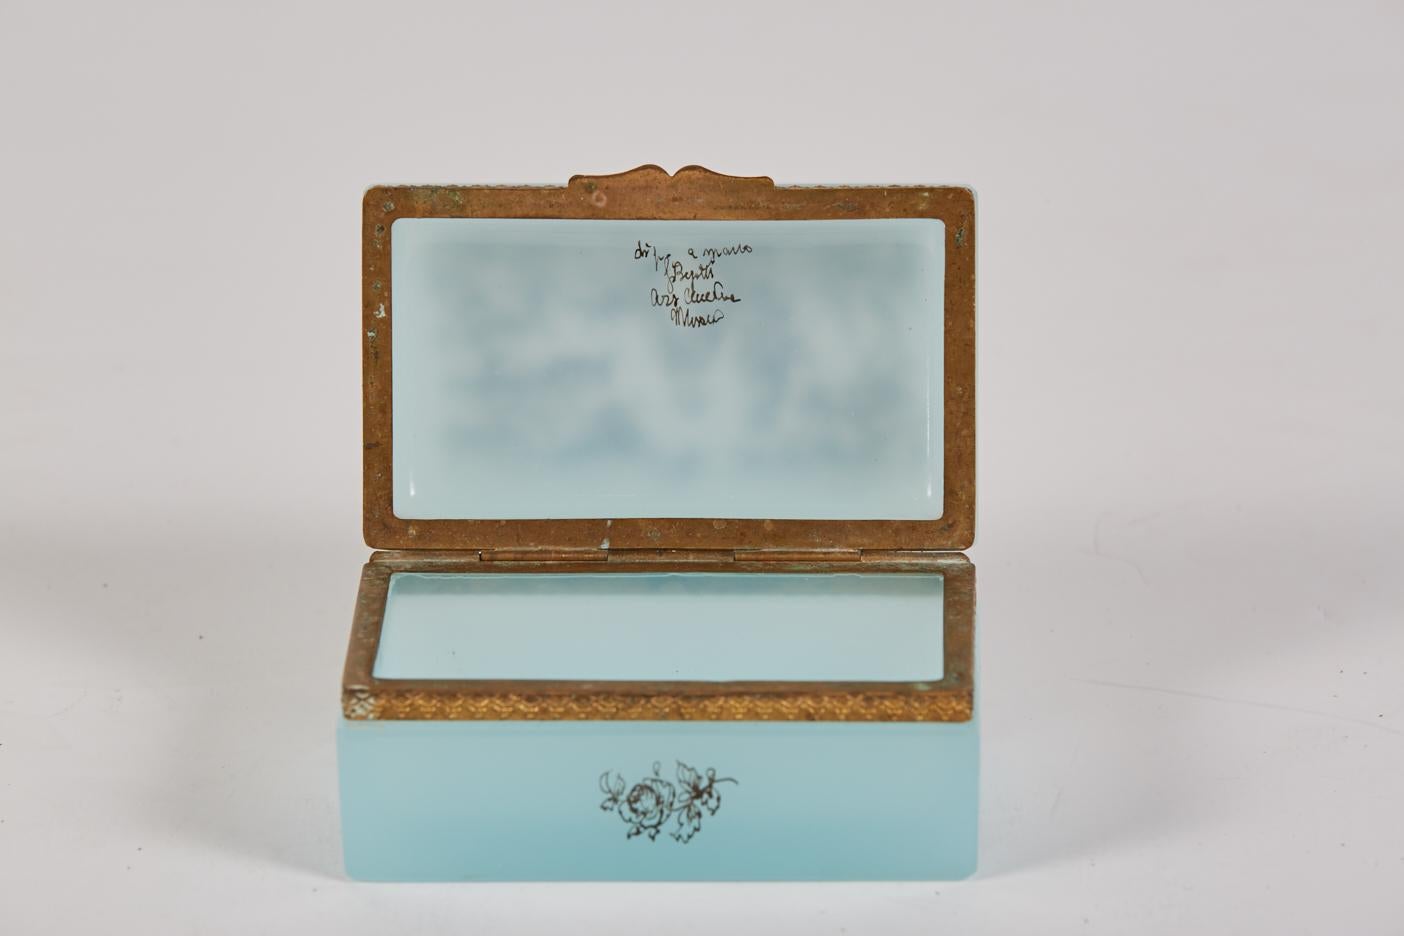 Fratelli Murano pale blue opaline glass hinged box with enameled decoration and gilt metal mount. The exterior enameled decoration shows a man and woman in 18th century attire in a woodland setting. 
 The interior of the box bears the signature of